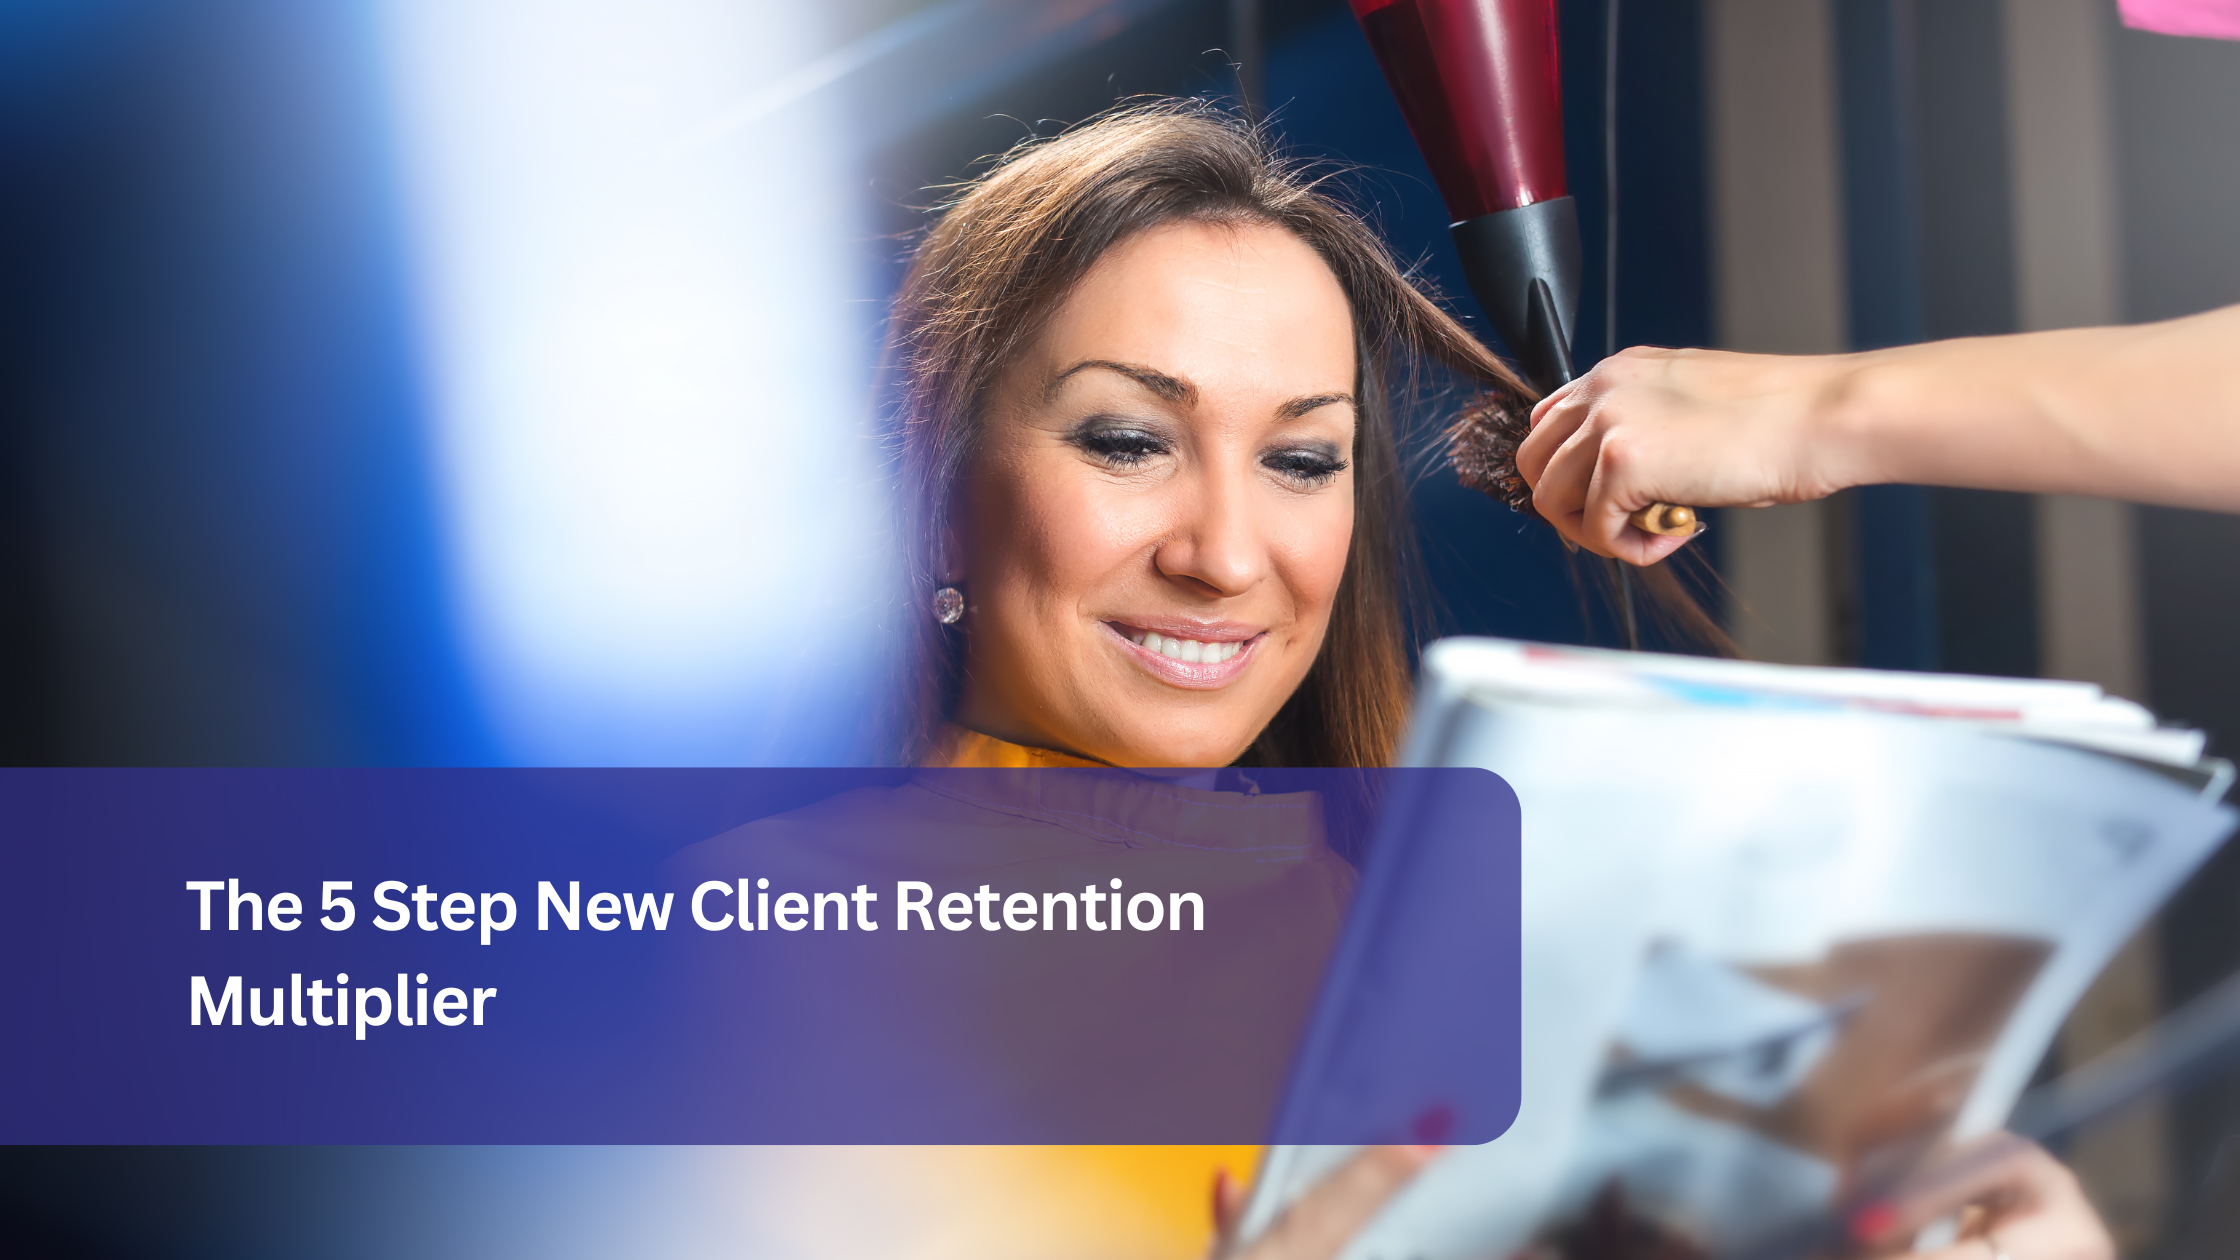 The 5 Step New Client Retention Multiplier